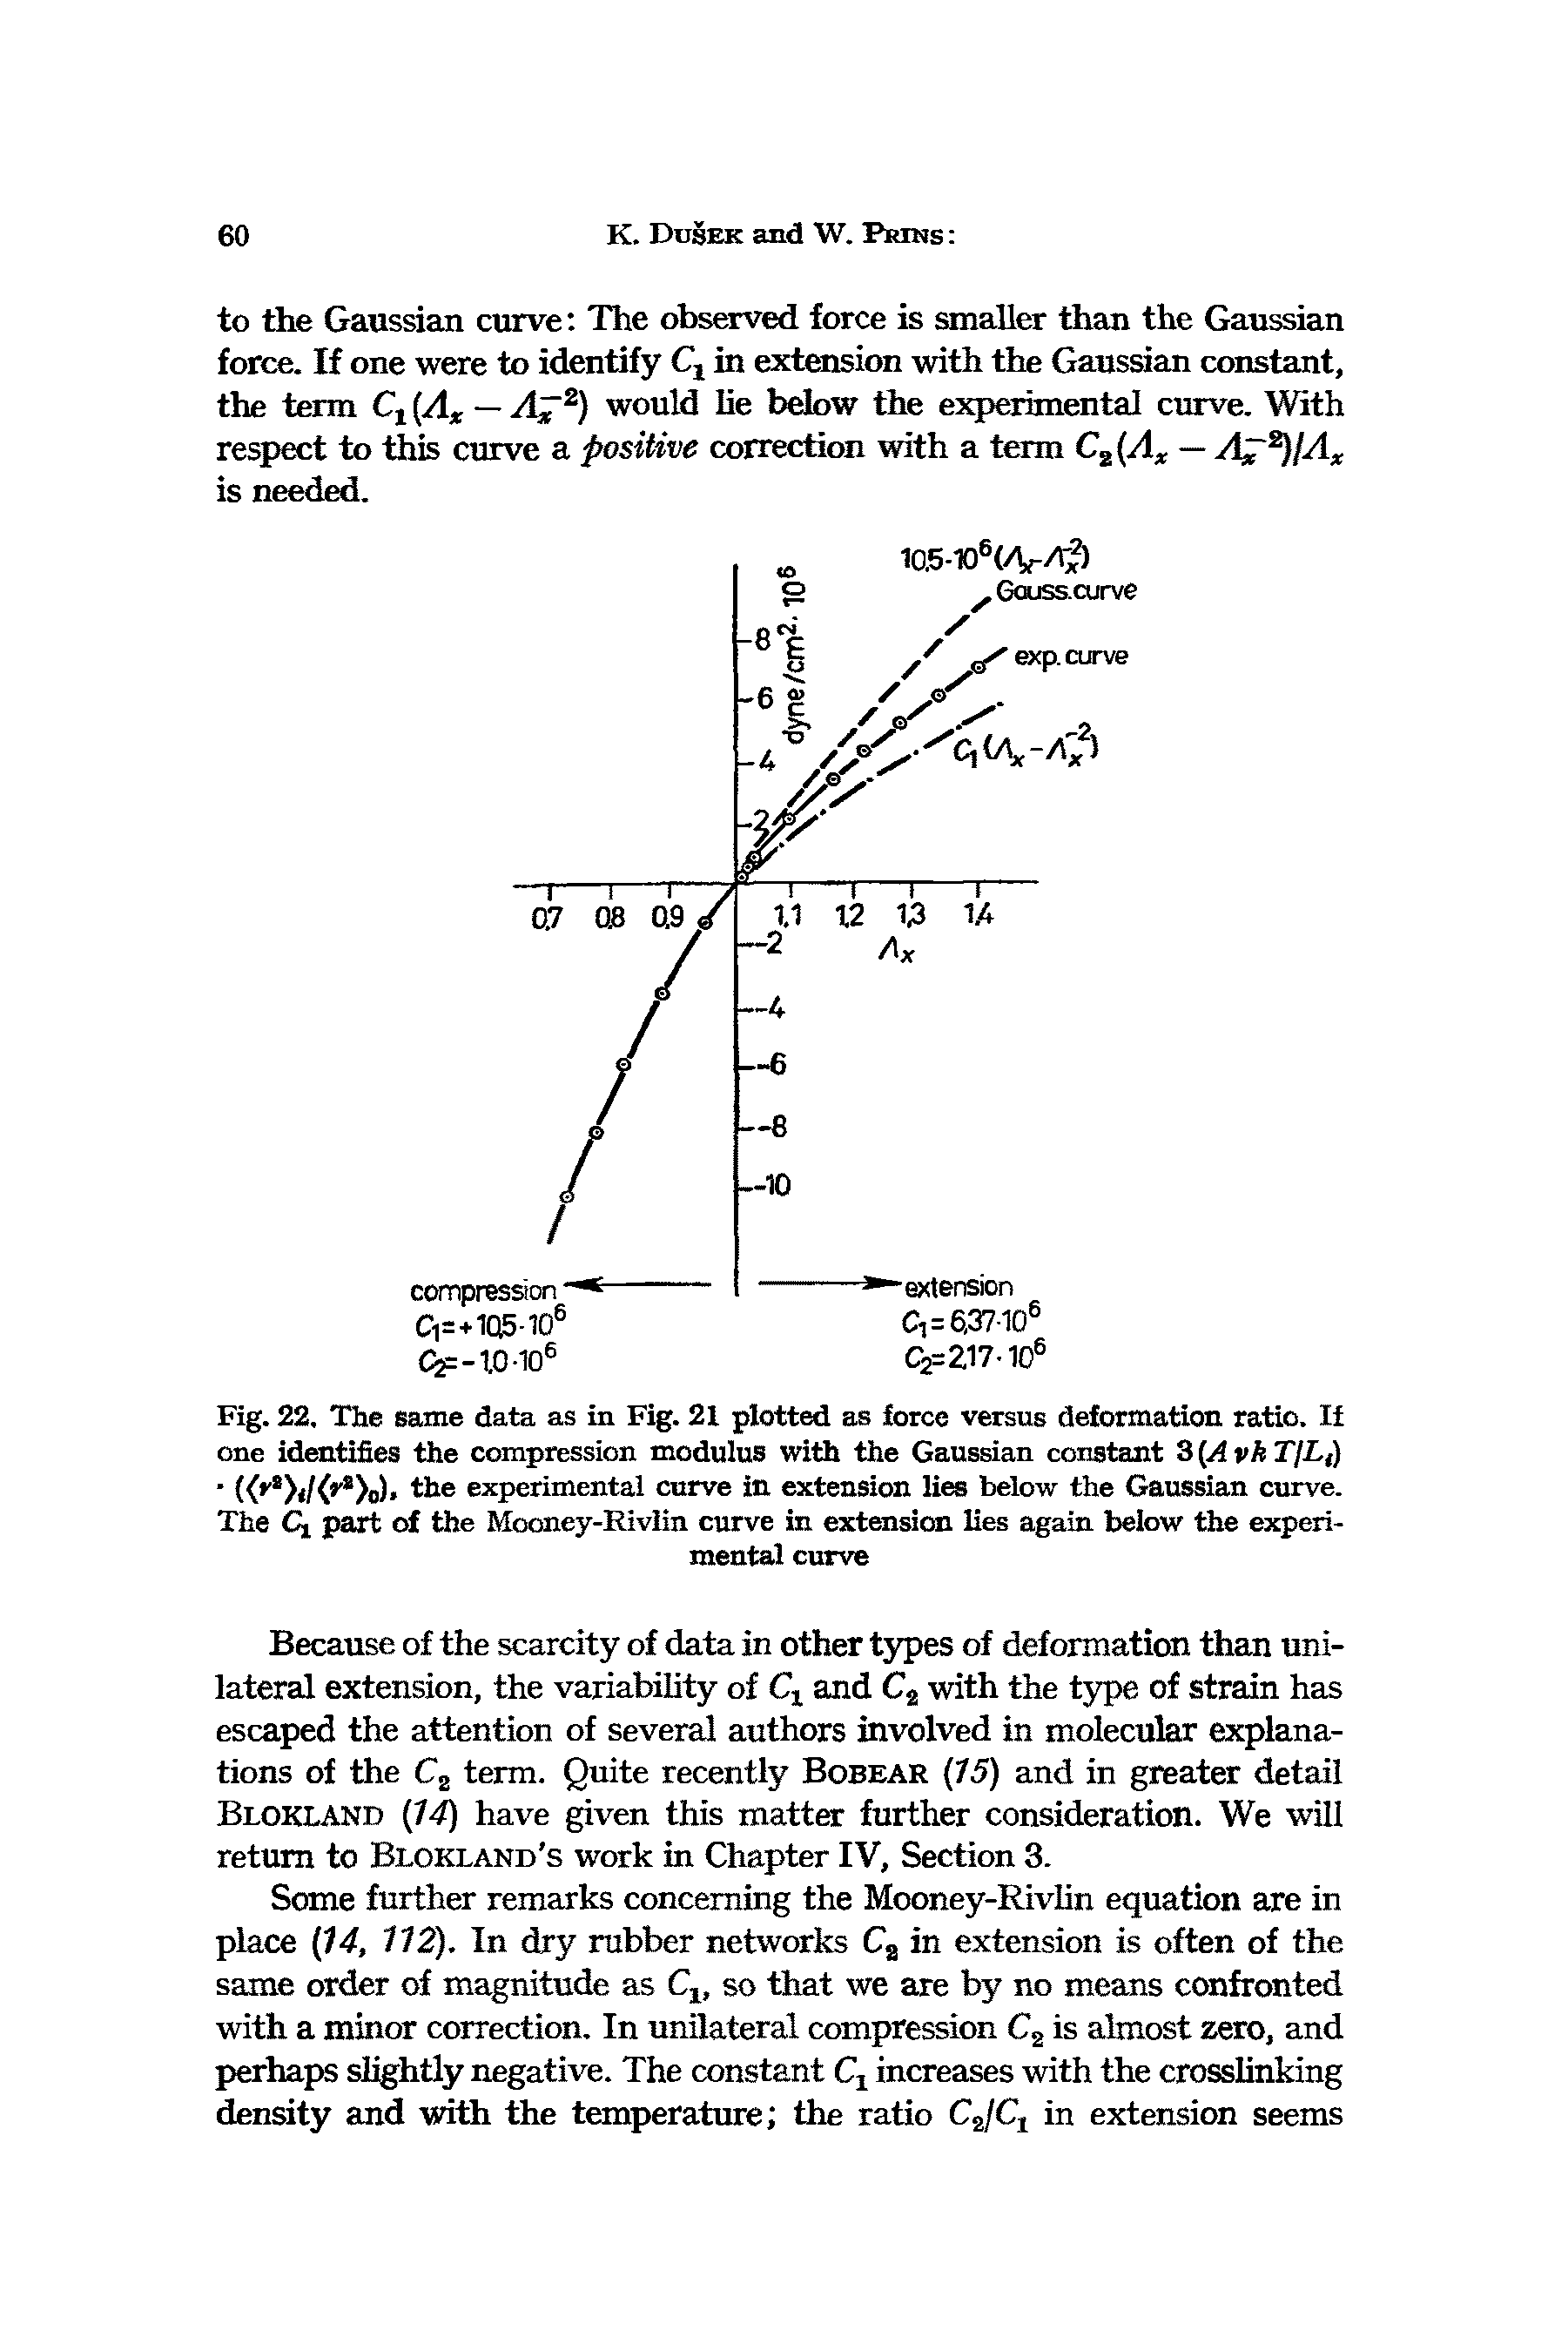 Fig. 22, The same data as in Fig. 21 plotted as force versus deformation ratio. If one identifies the compression modulus with the Gaussian constant 3 (A vk T/Lt) (( ></( >o) the experimental curve in extension lies below the Gaussian curve. The C part of the Mooney-Rivlin curve in extension lies again below the experimental curve...